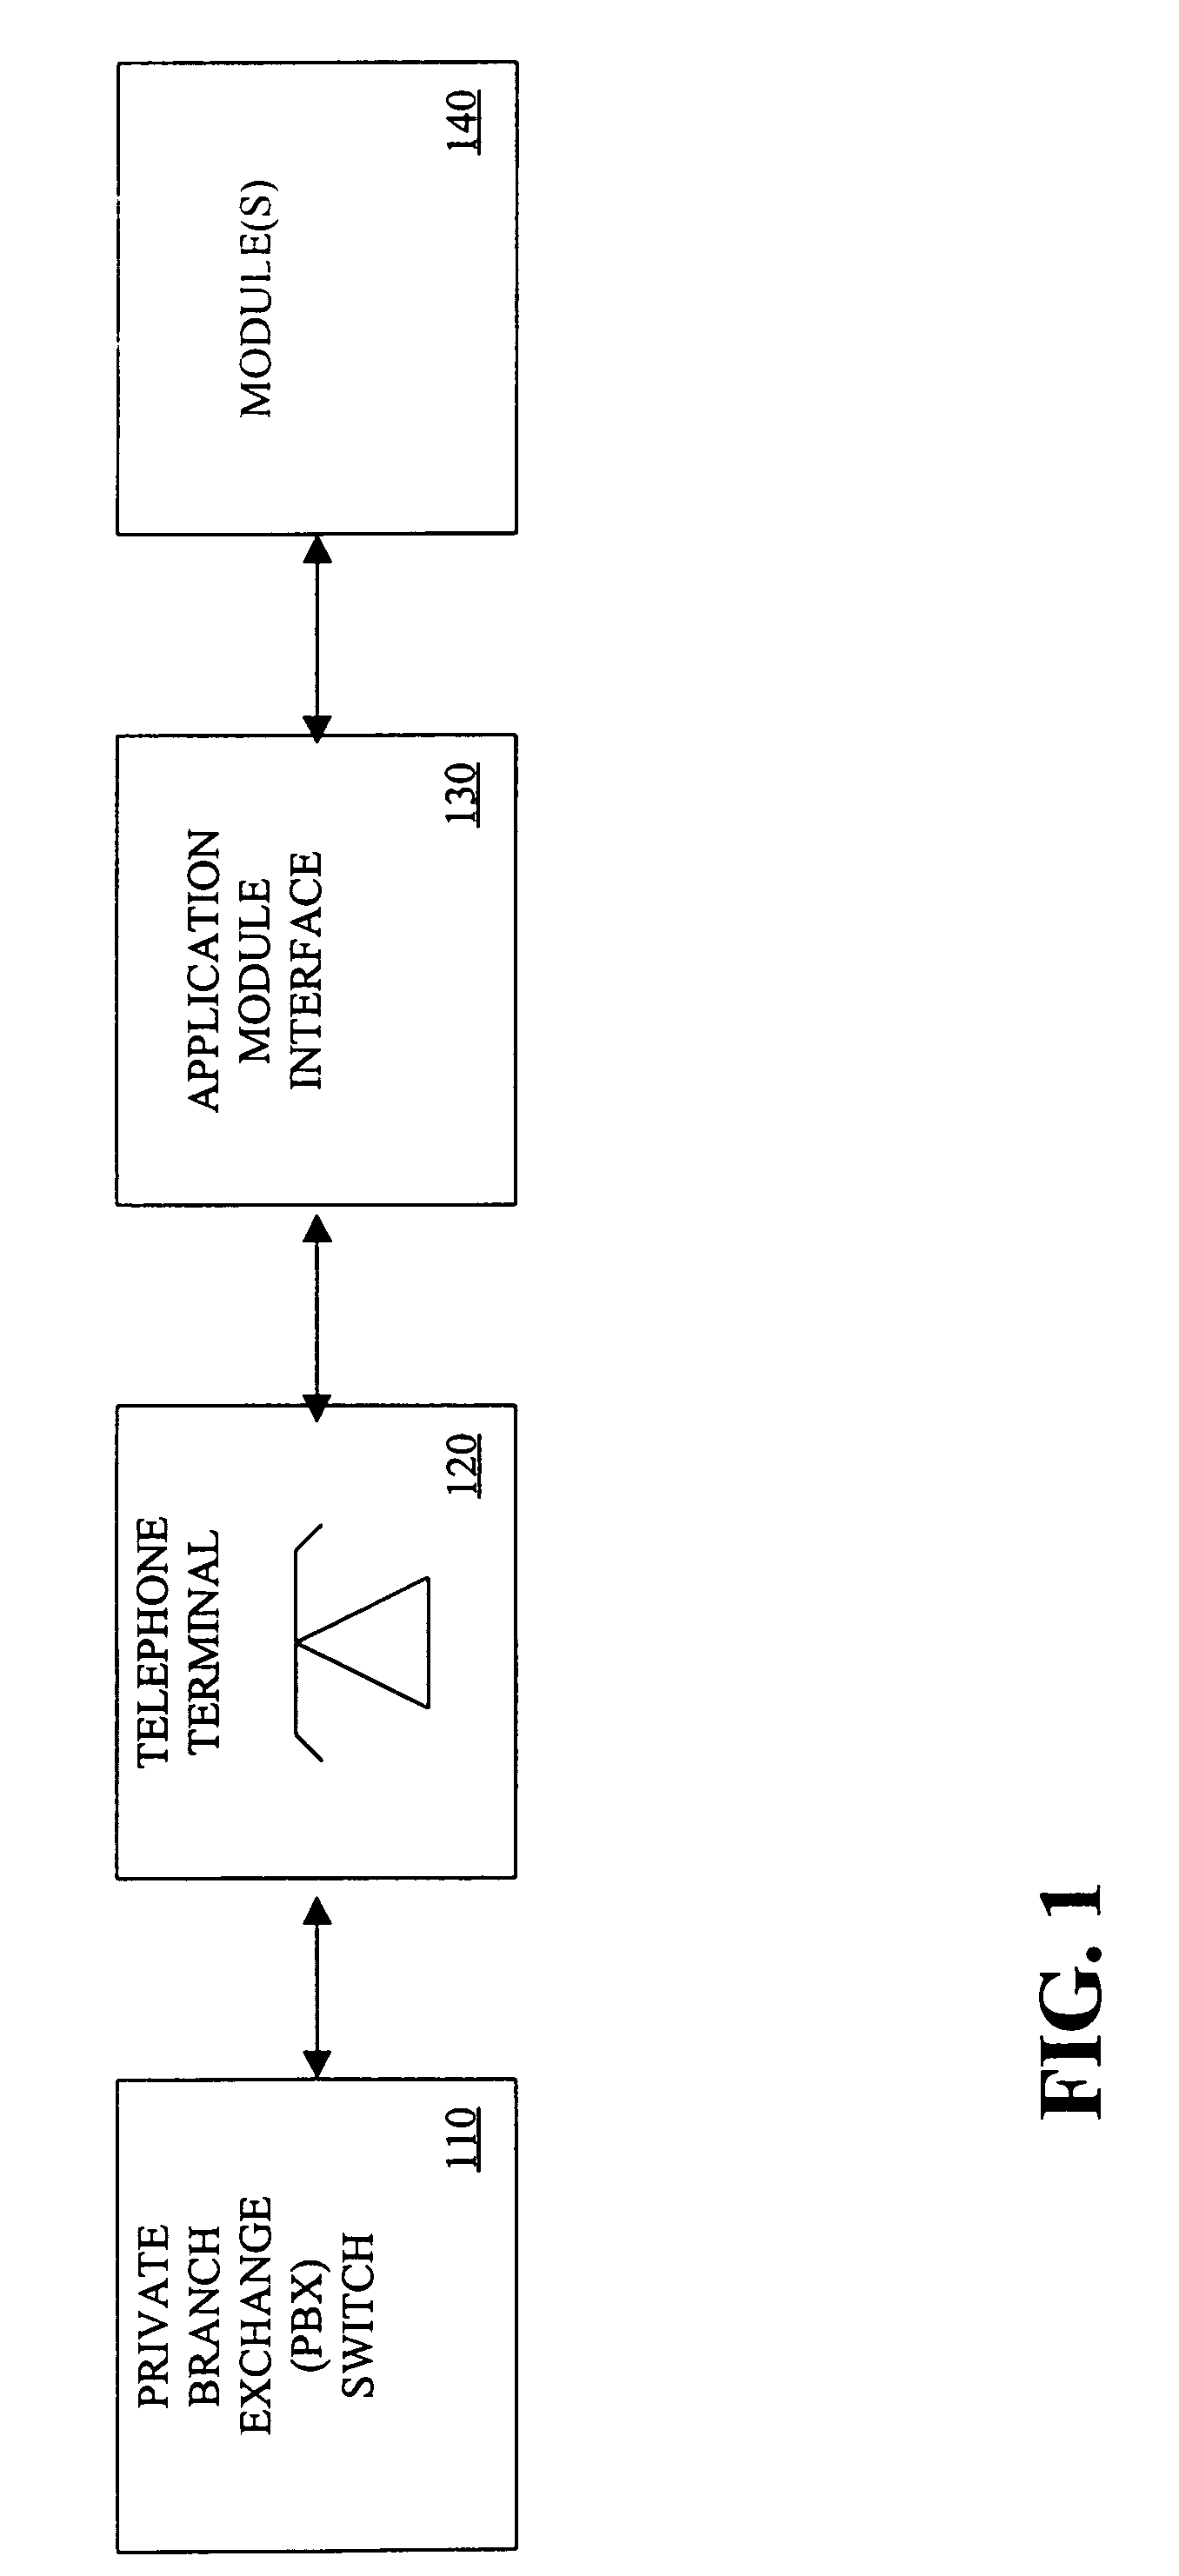 Application module interface for bidirectional signaling and bearer channels in a private branch exchange (PBX) environment